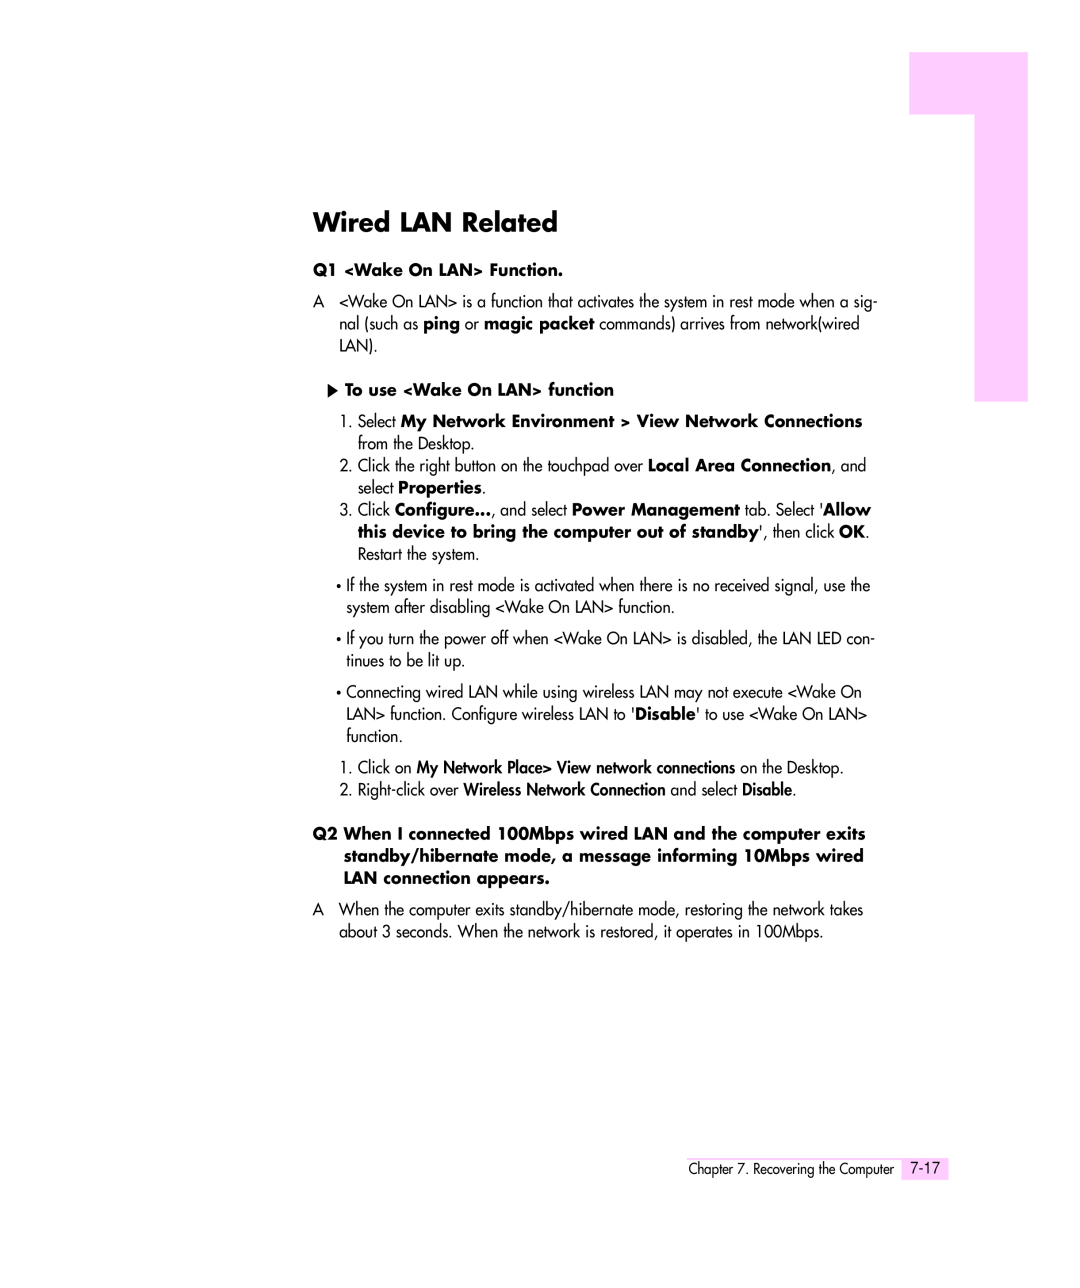 Samsung Q35 manual Wired LAN Related, Q1 Wake On LAN Function, To use Wake On LAN function 